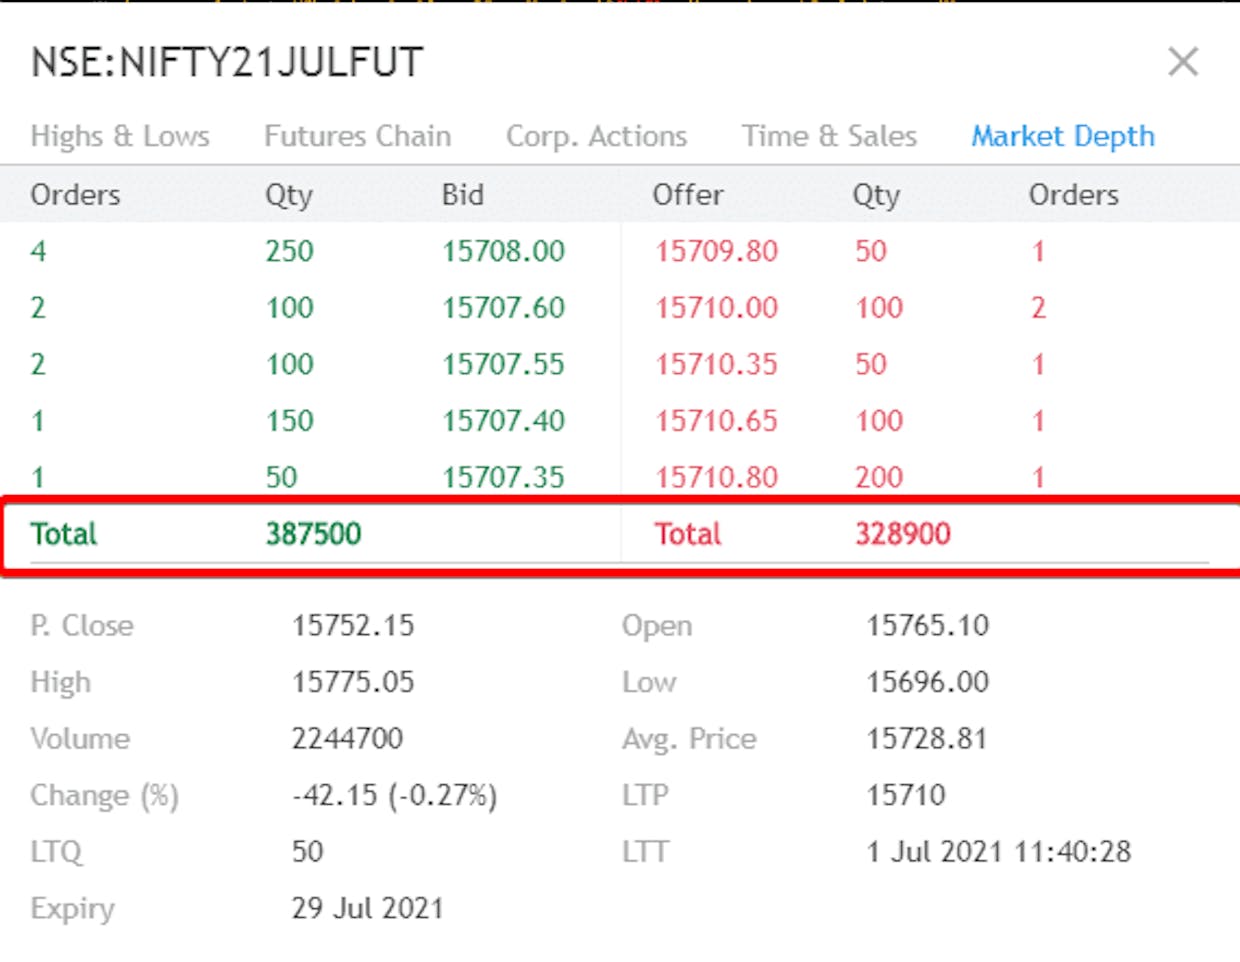 DOM window do not display the total buy quantity and total sell quantity, please enable this feature as available in trading view platform. 